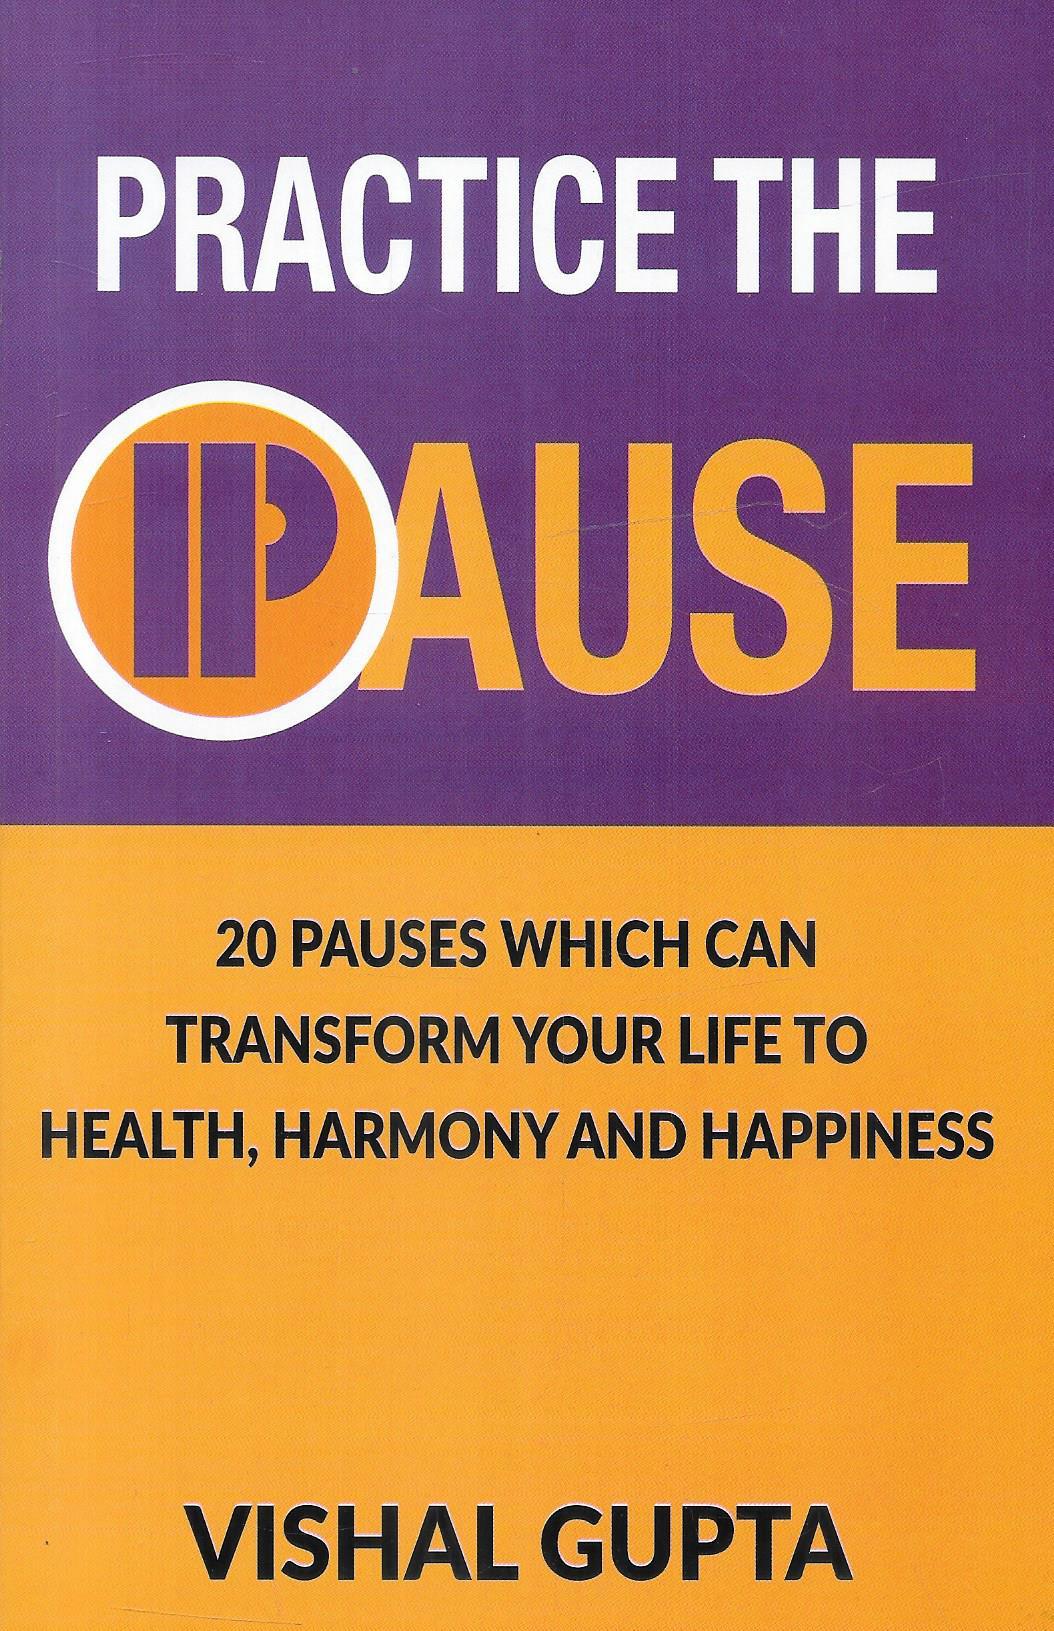 Practice the Pause